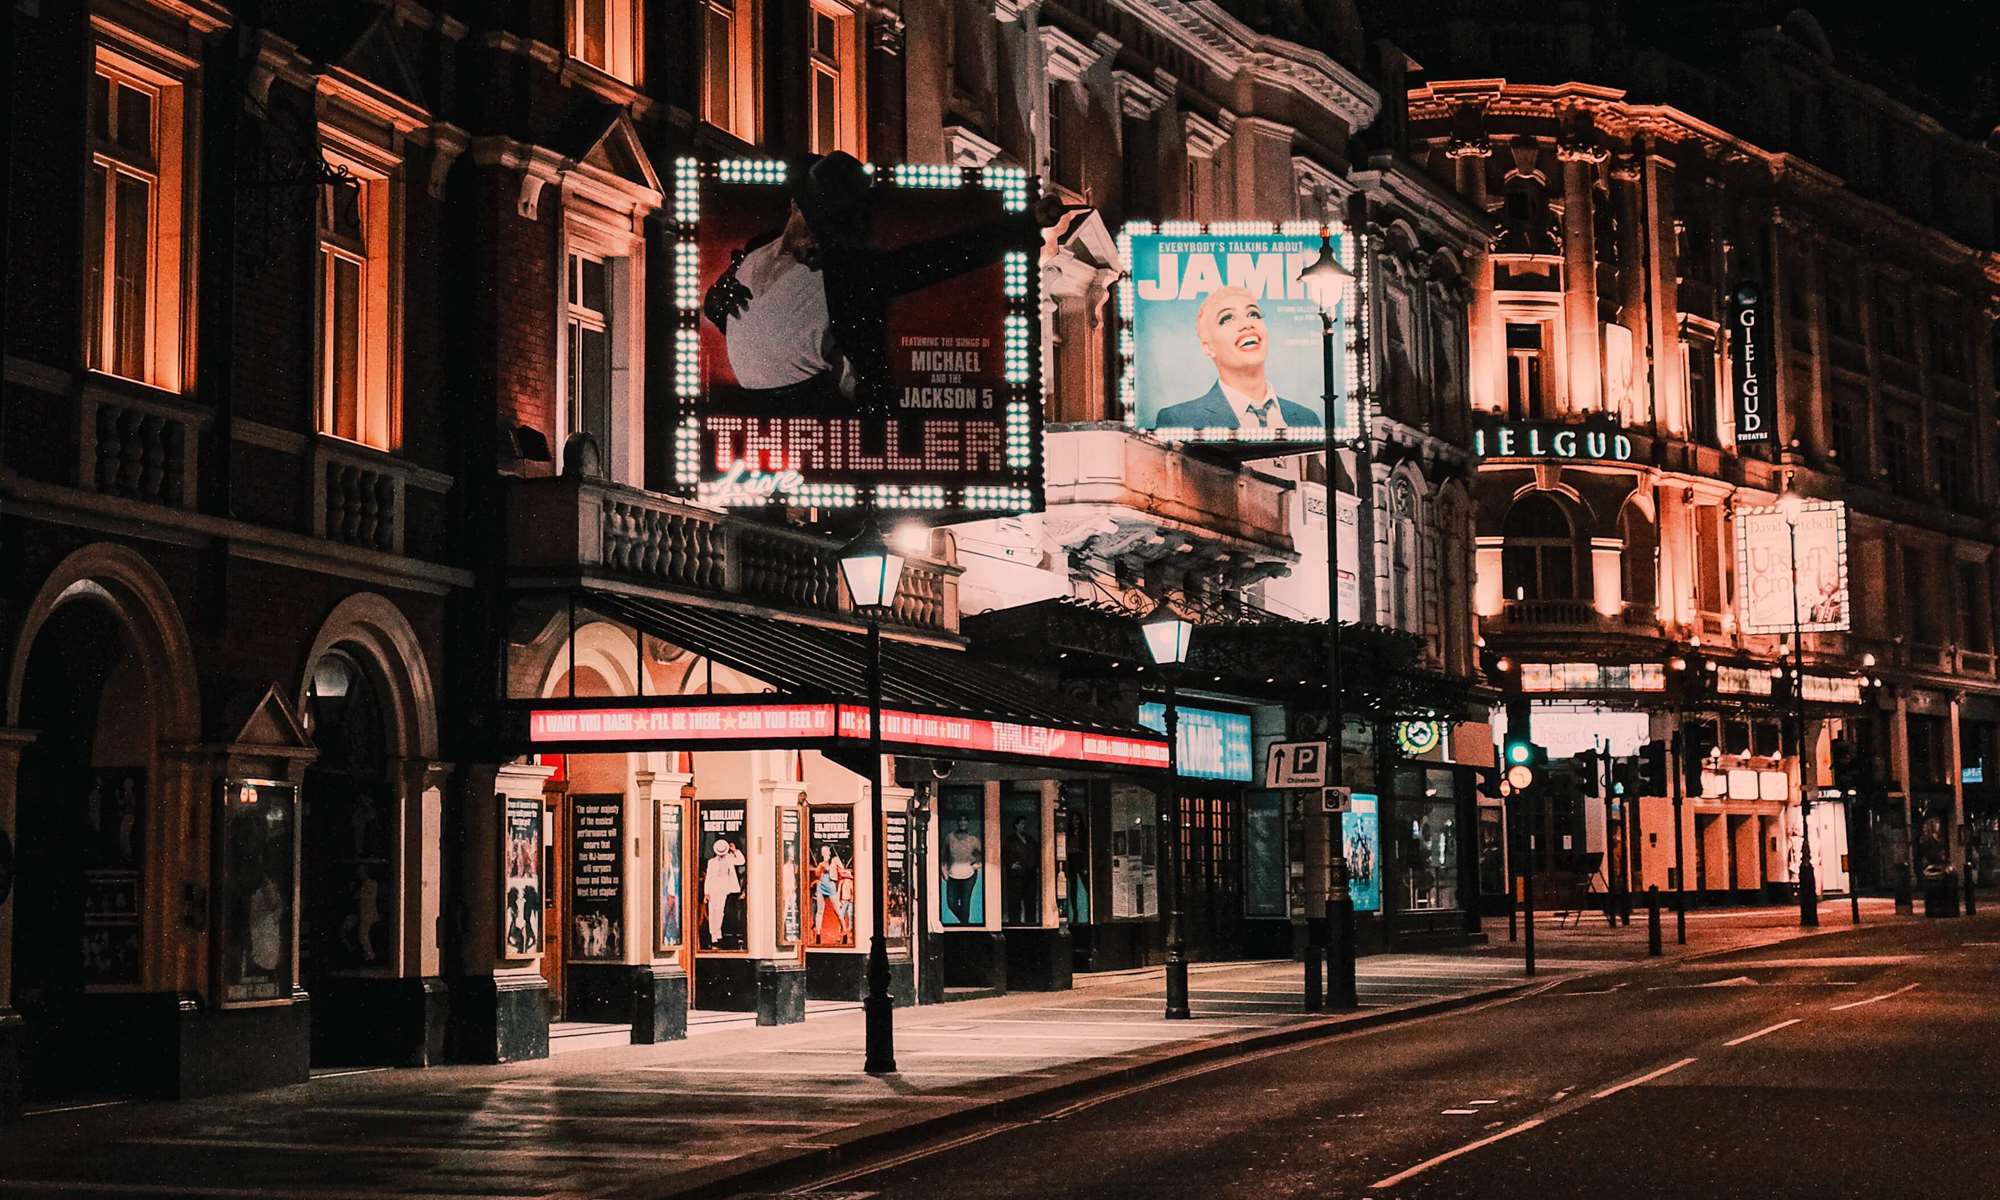 Night time view of Theatre in London